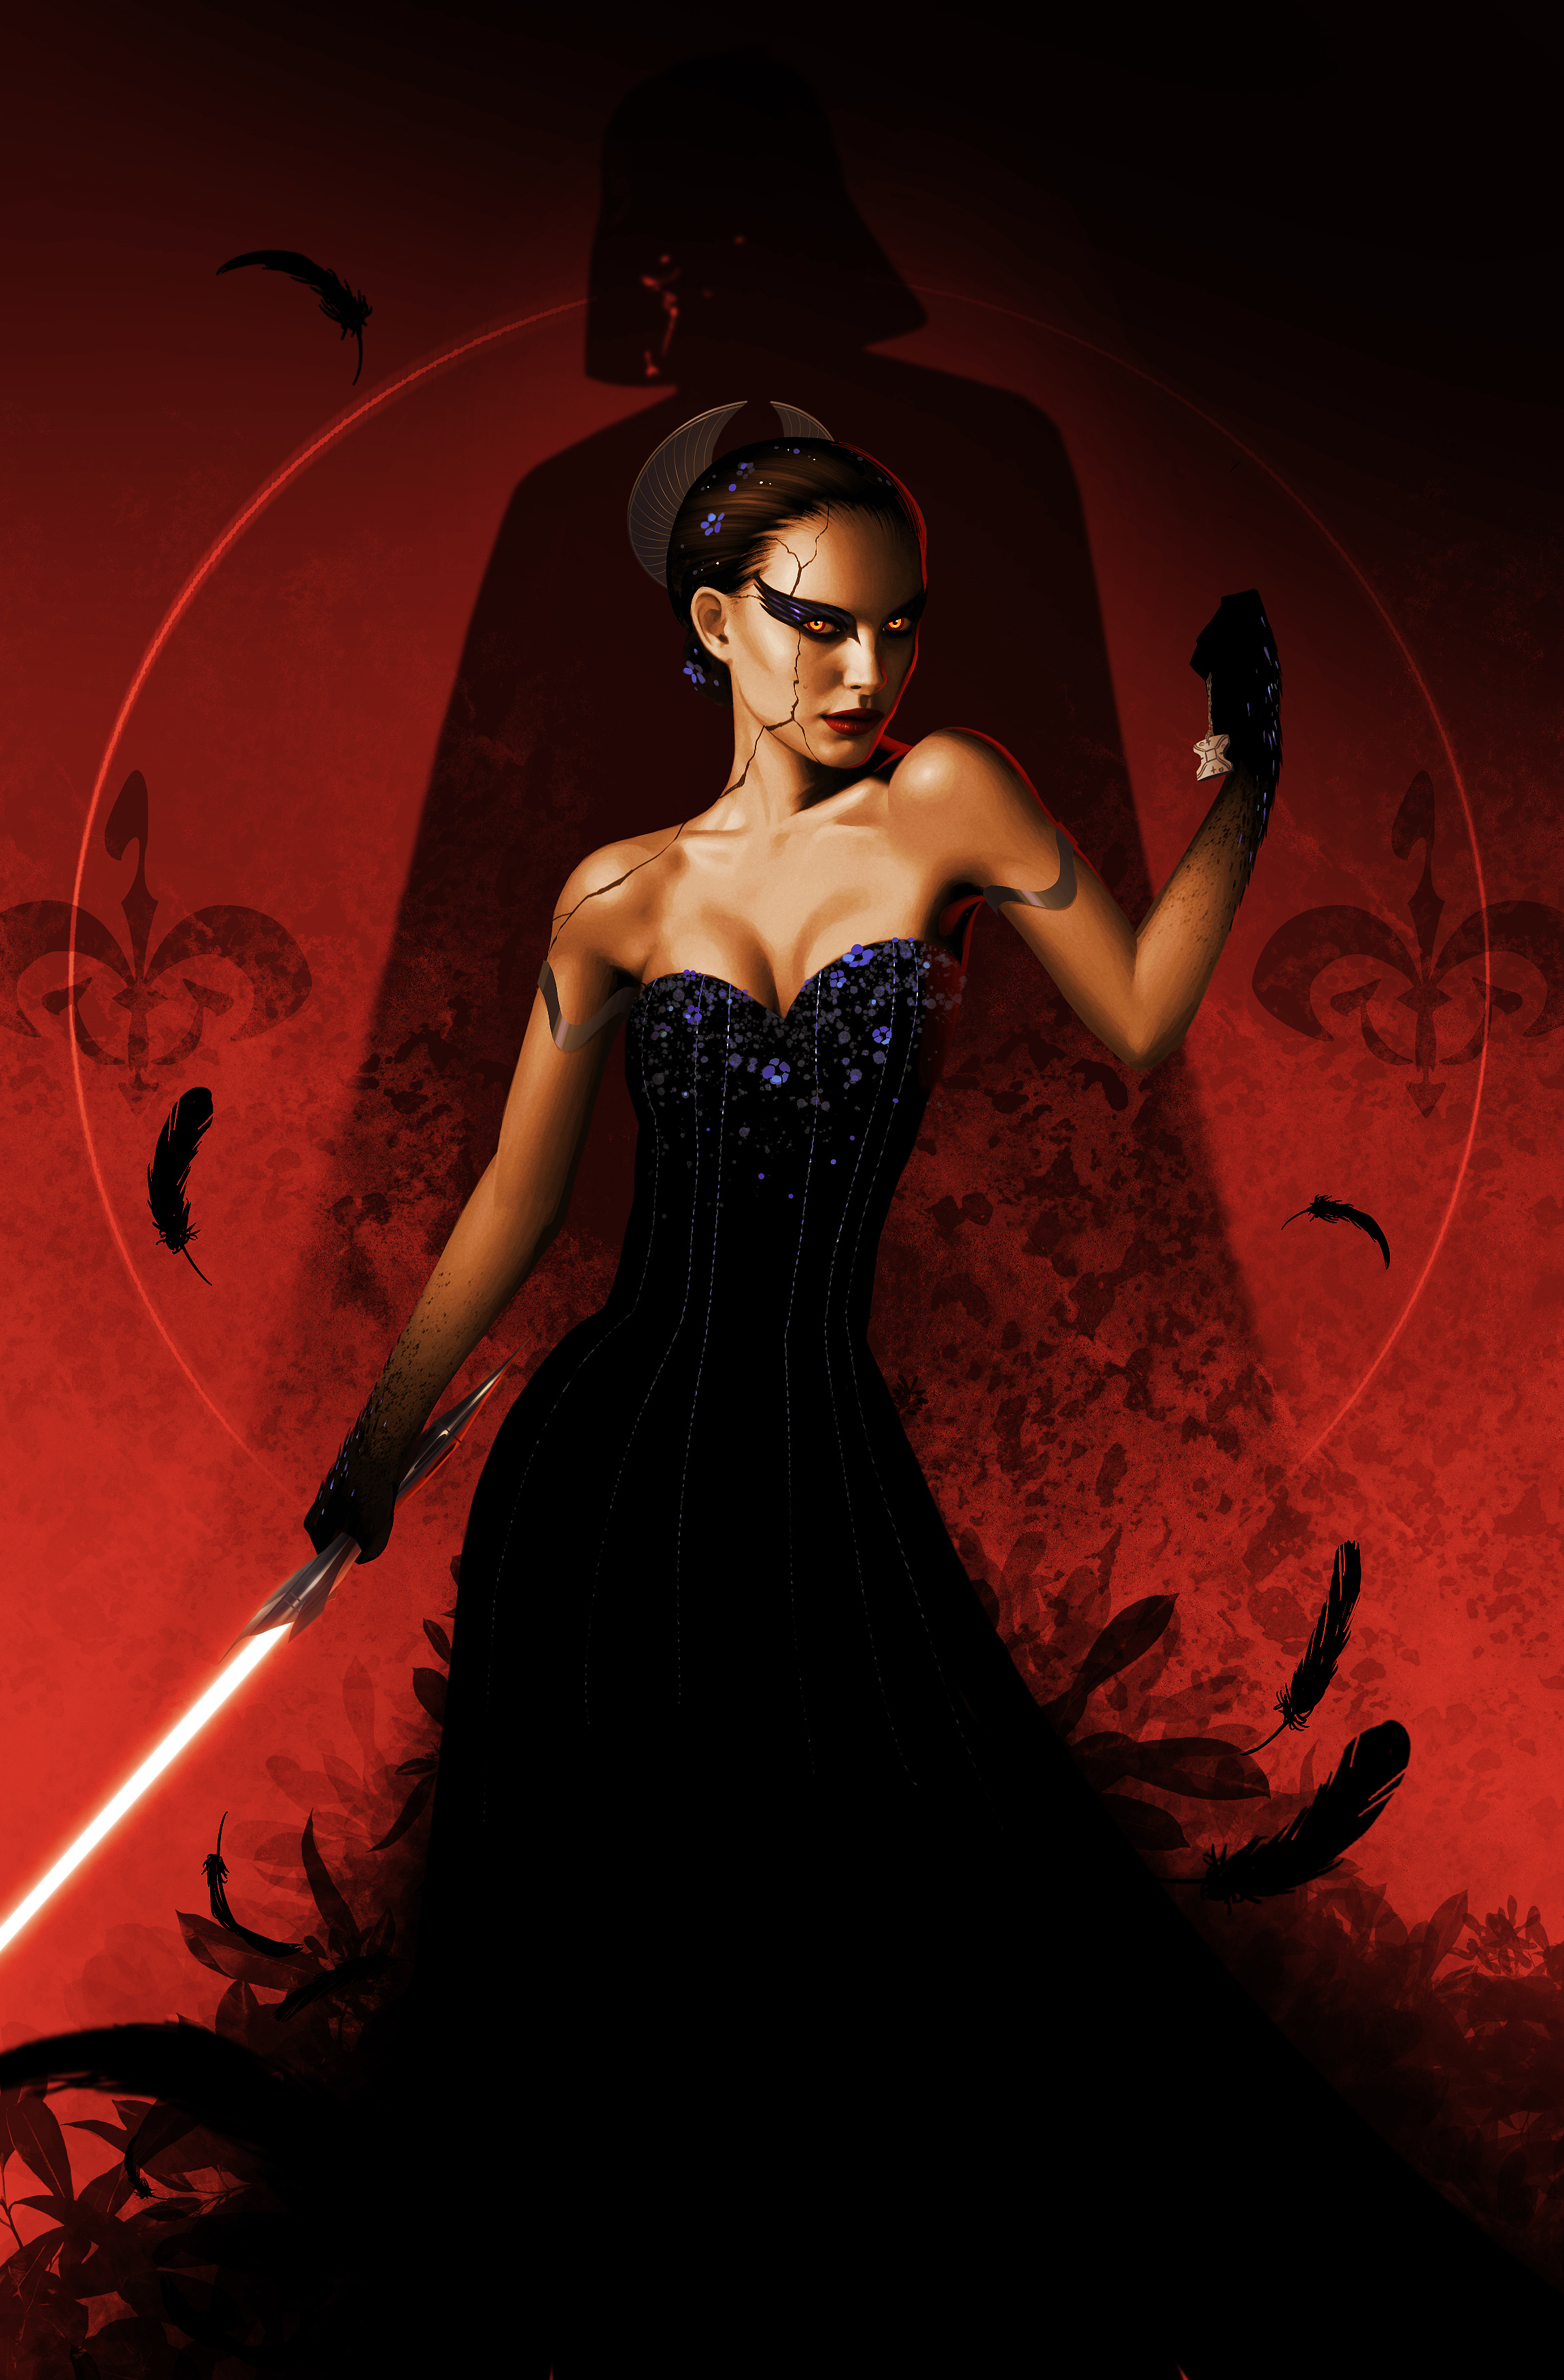 General 2300x3500 Star Wars Anakin Skywalker Padme Amidala Darth Vader Sith red background lightsaber red movies digital art clothes couple emperor cleavage Black Swan